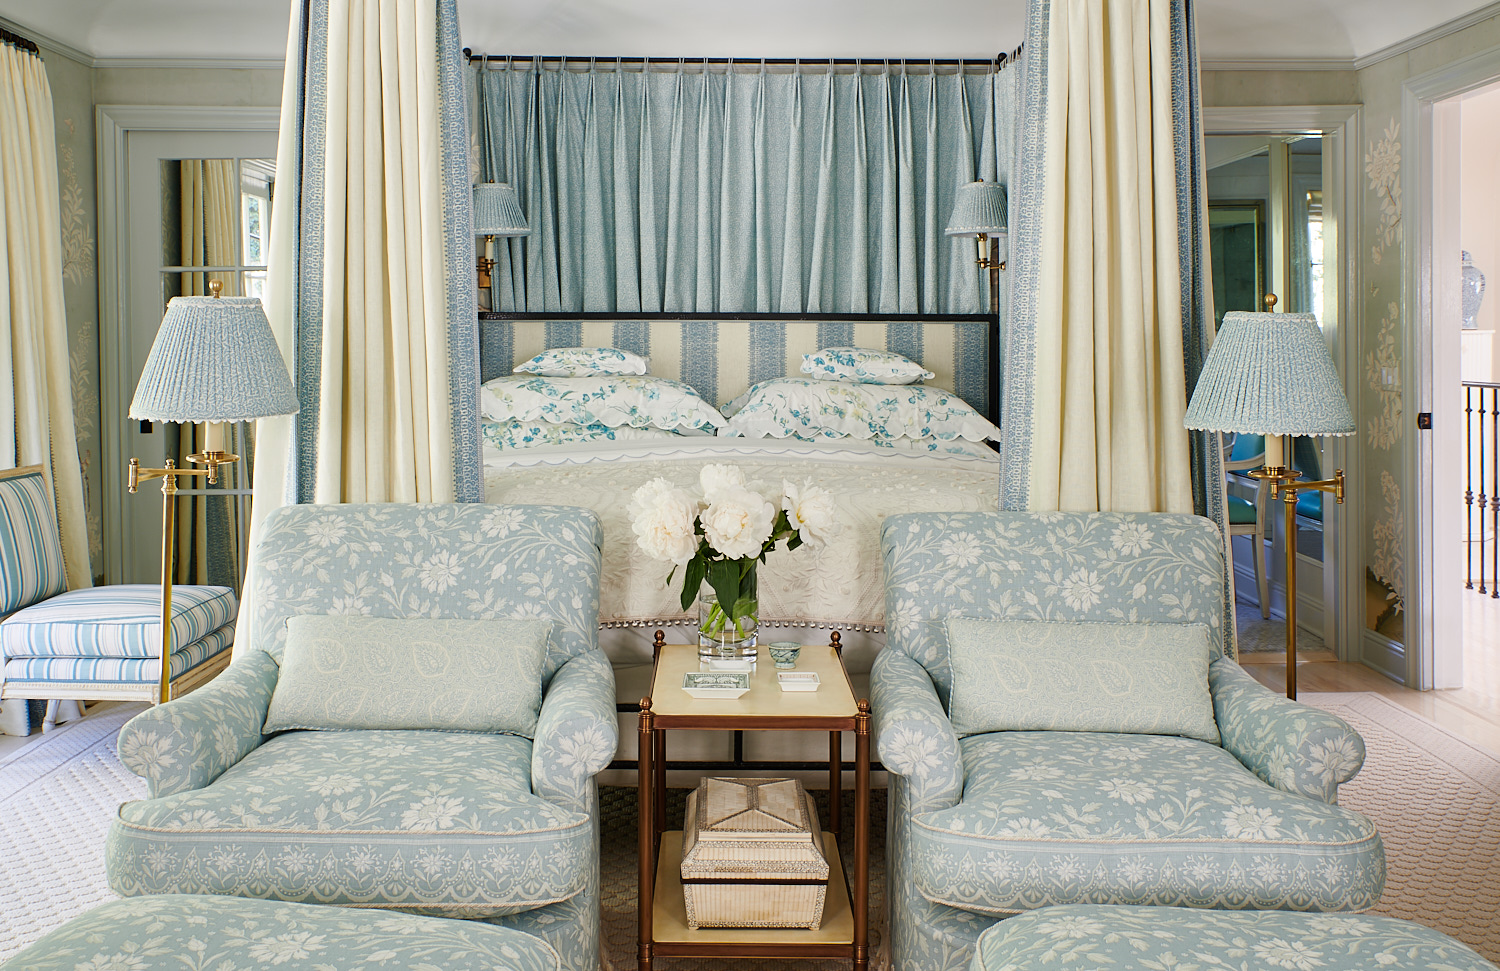 Wide view of bed drapes, stripe upholstered headboard, floral shams, and floral upholstered club chairs with matching ottomans